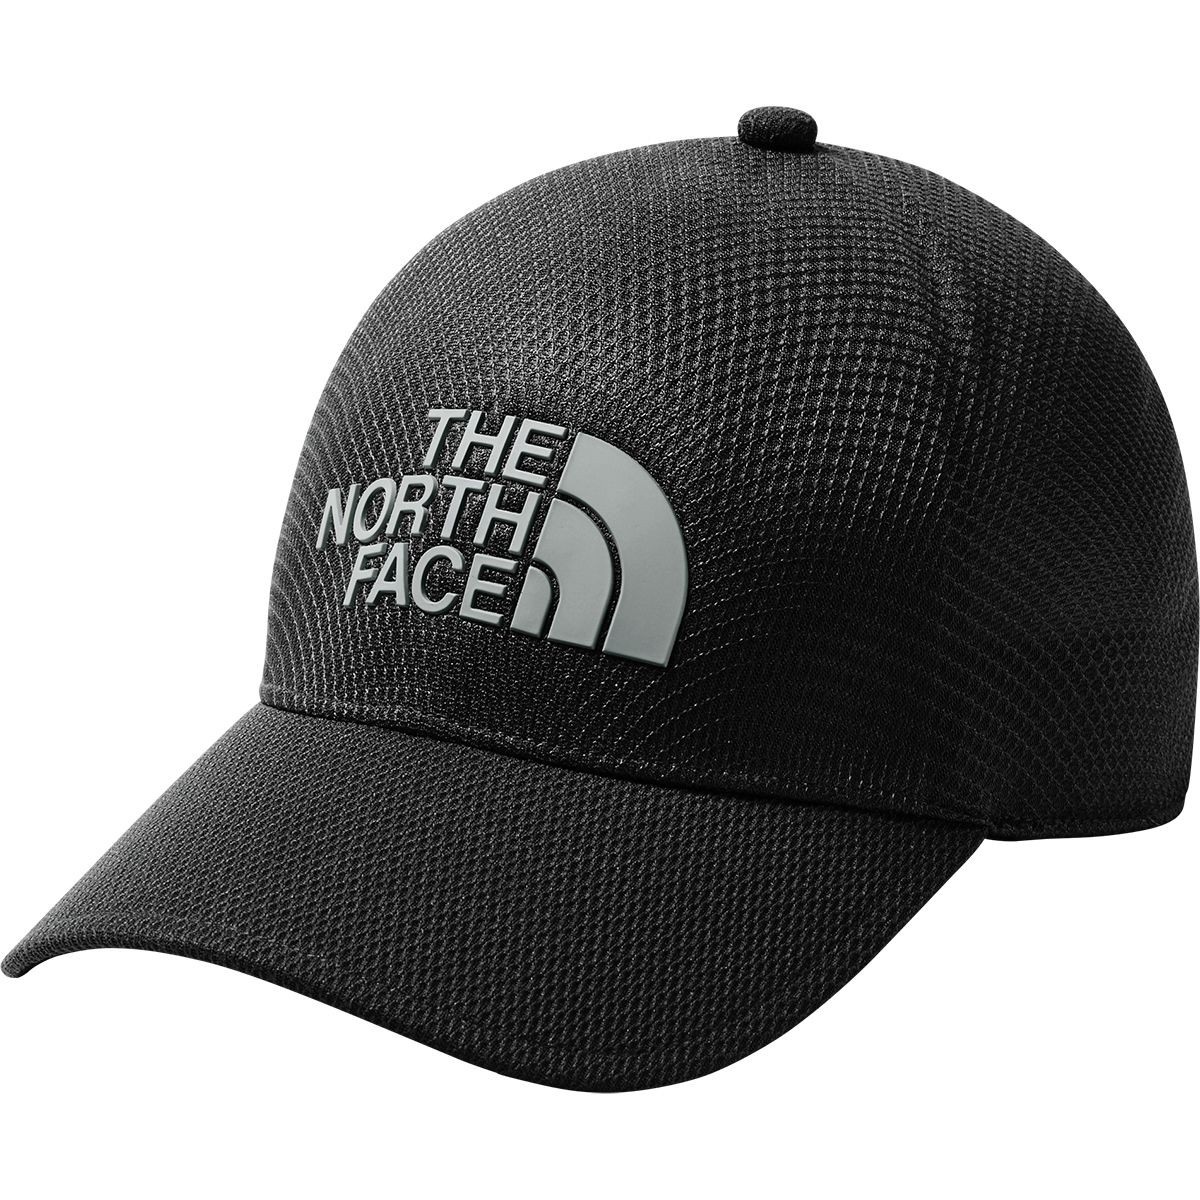 The North Face One Touch Lite Ball Cap | Backcountry.com